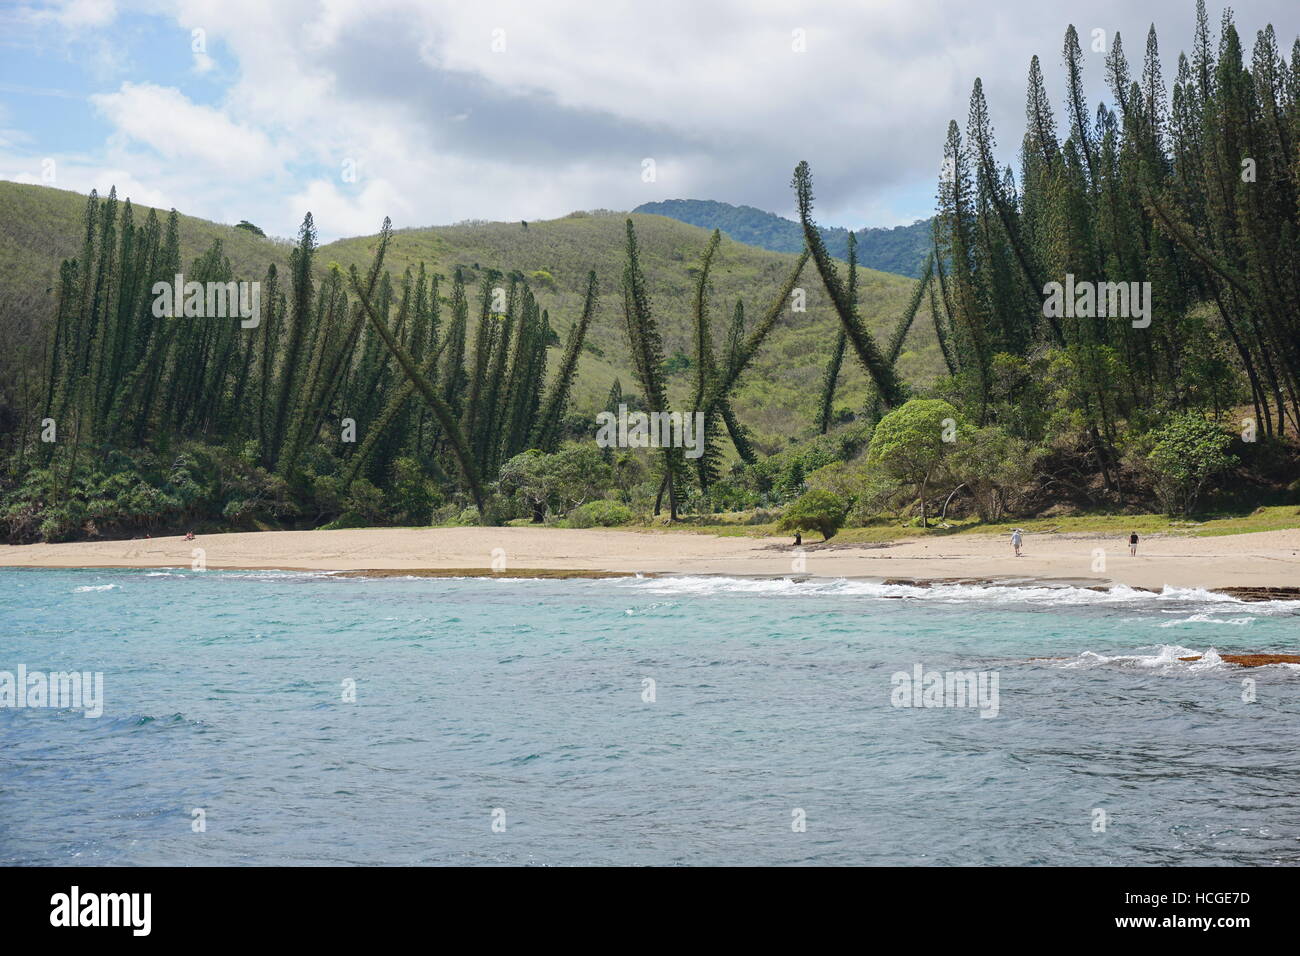 Coastal landscape, Turtle bay beach with its pines, Araucaria luxurians, Bourail, Grande Terre, New Caledonia, south Pacific Stock Photo